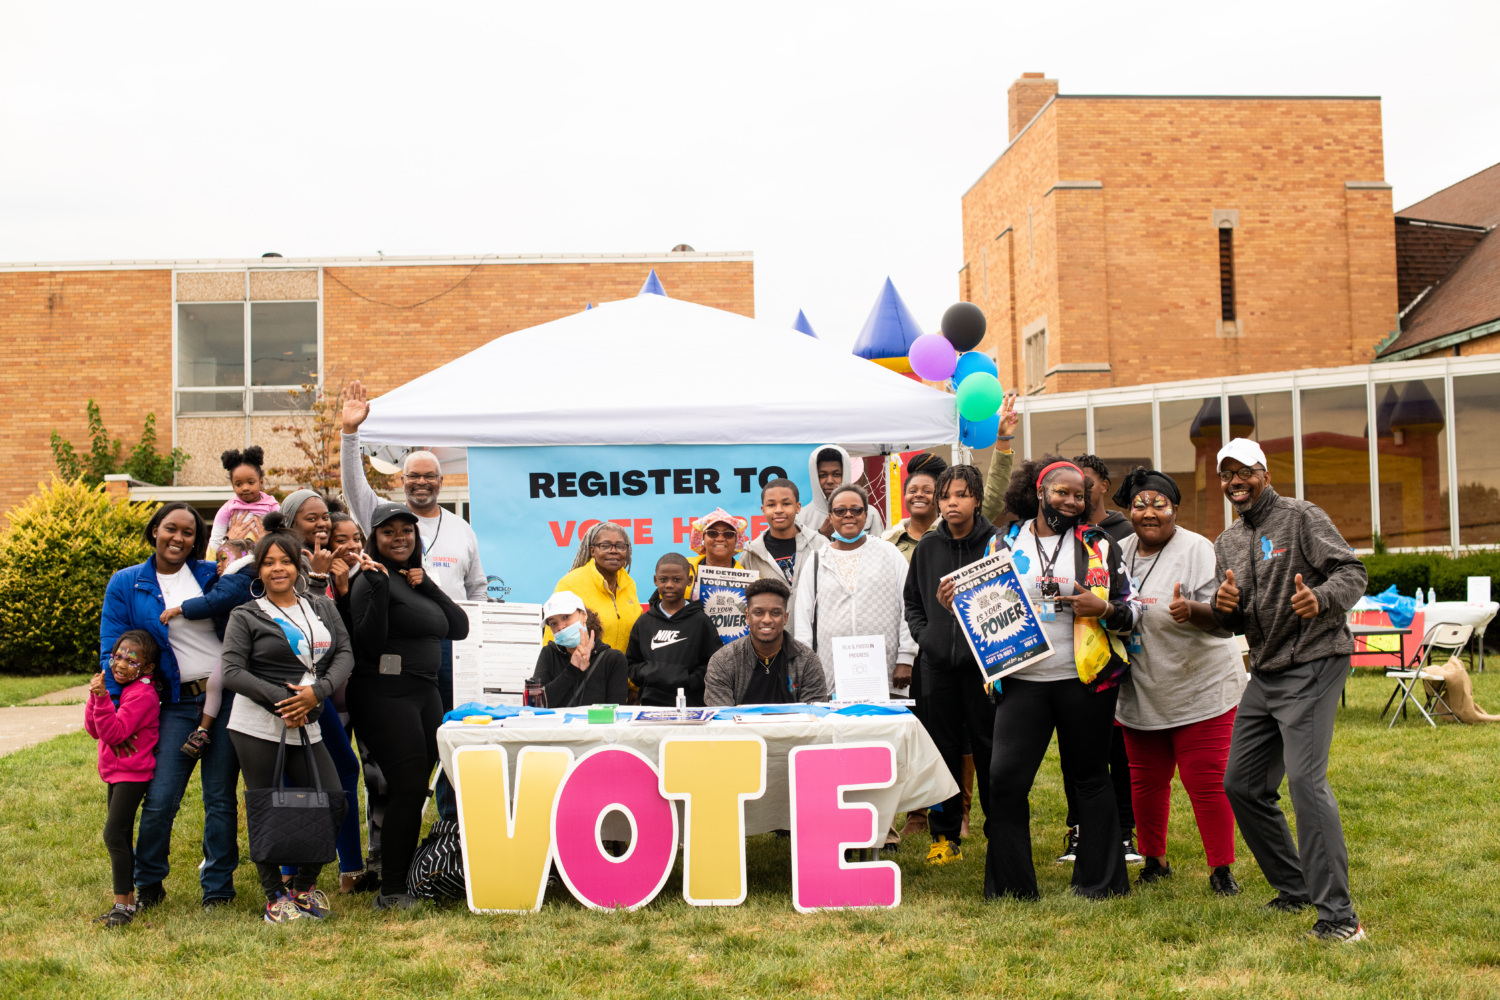 A group poses for a photo at a Democracy For All Event, signs include "Vote" and "Register to vote here"